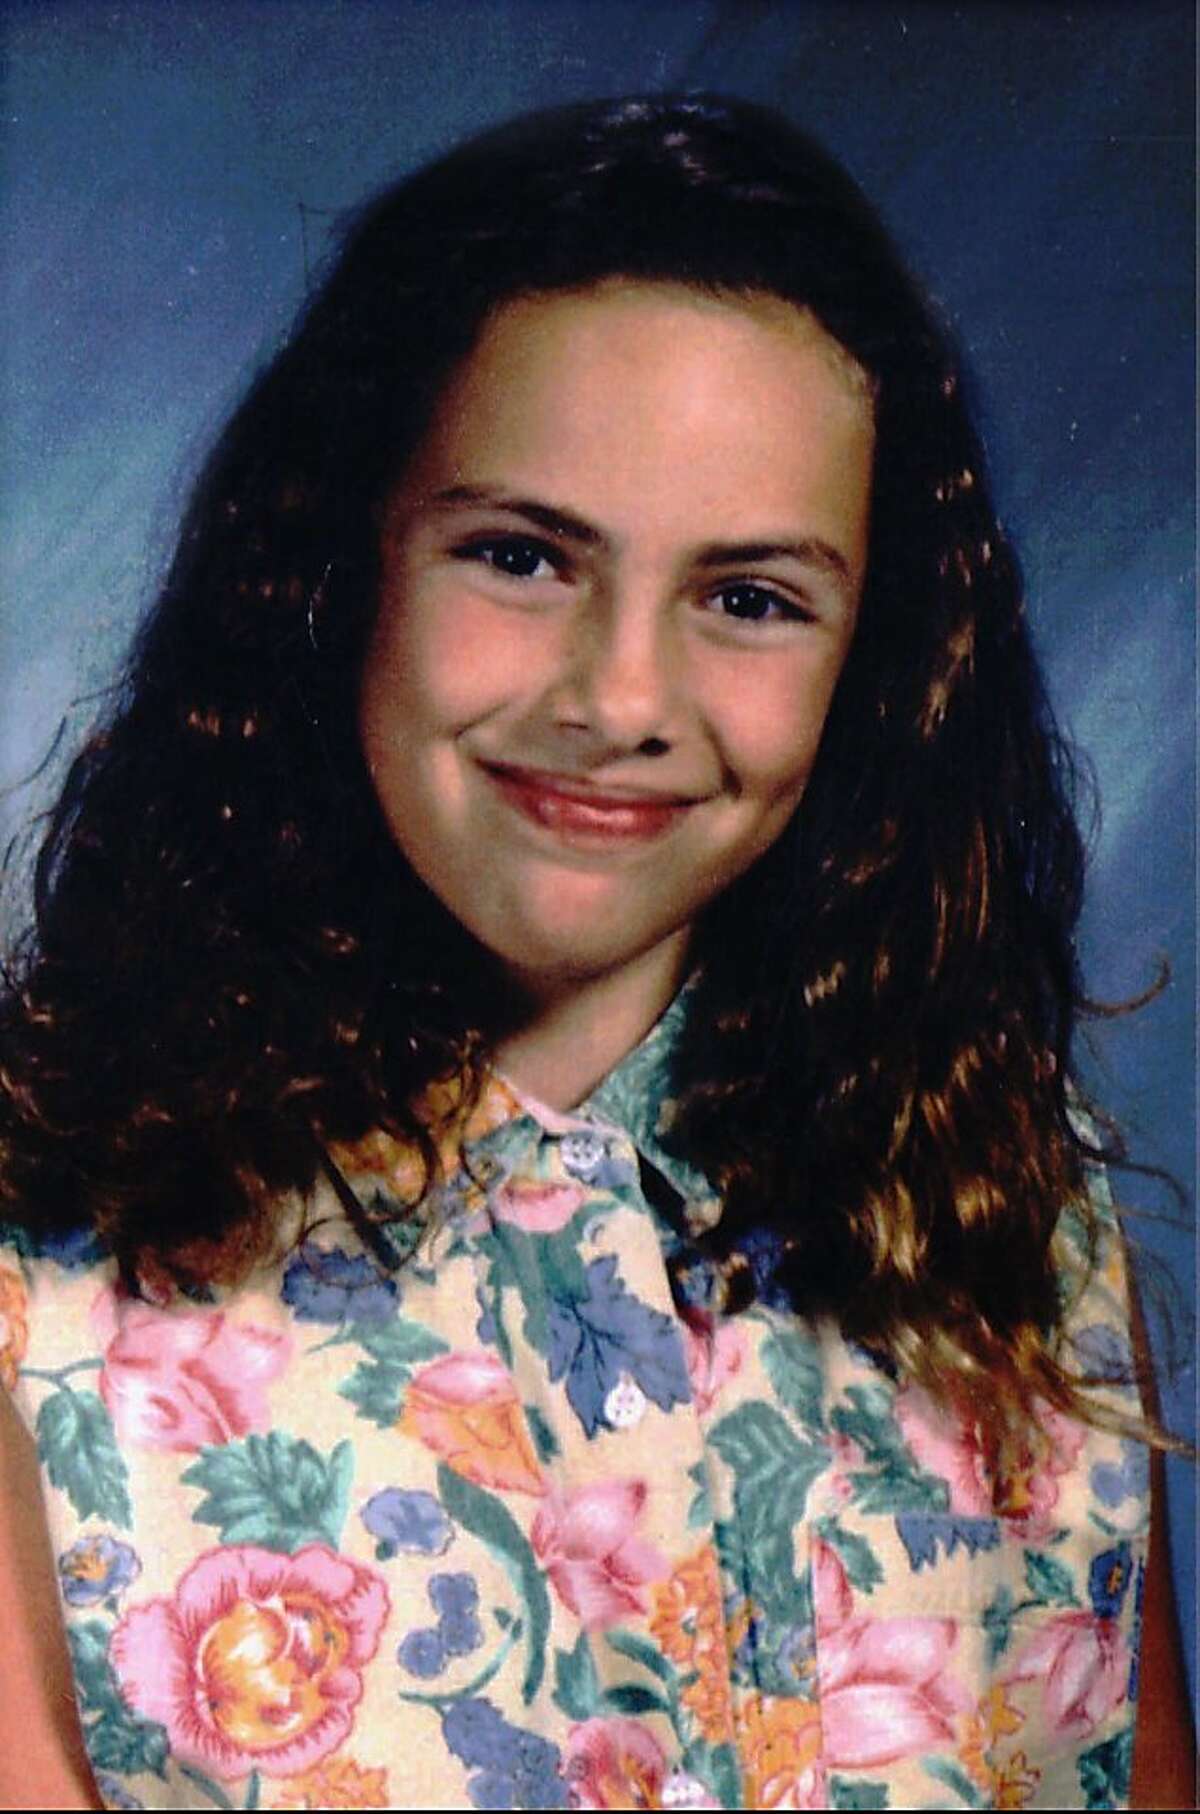 **FILE** In this 1993 file photo, 12-year-old Polly Klaas of Petaluma, Calif., is shown. More than 15 years after Richard Allen Davis confessed to kidnapping and killing Klaas, the state's high court will hear his appeal on Tuesday, March 3, 2009. (AP Photo)